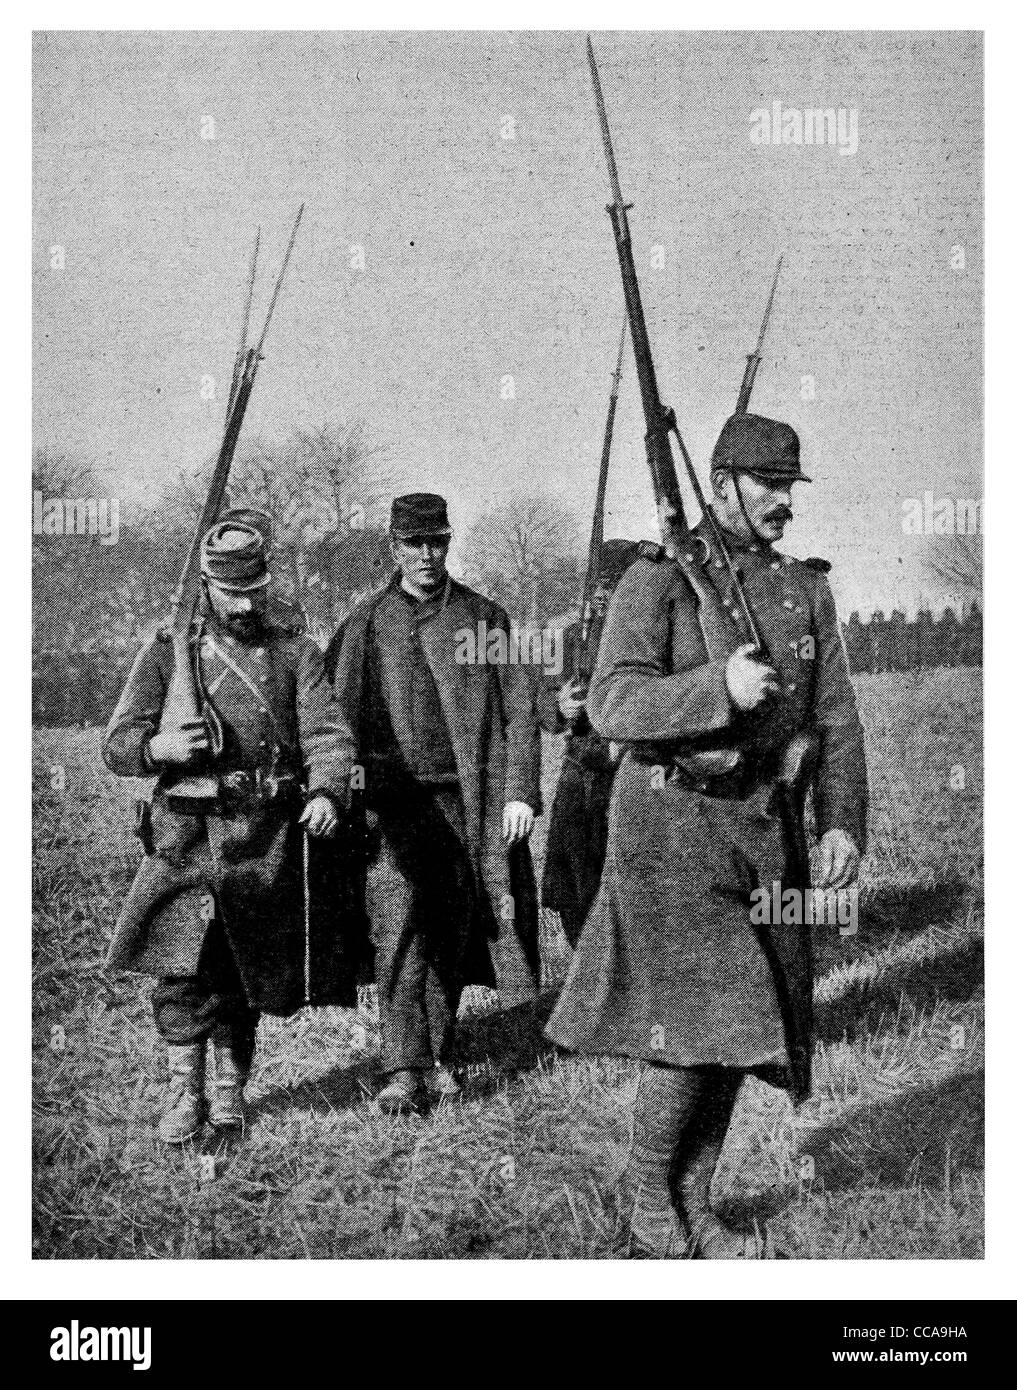 French Traitor deserter executed execution 1916 execution desertion AWOL absence without leave executioner shot dead by rifle Stock Photo